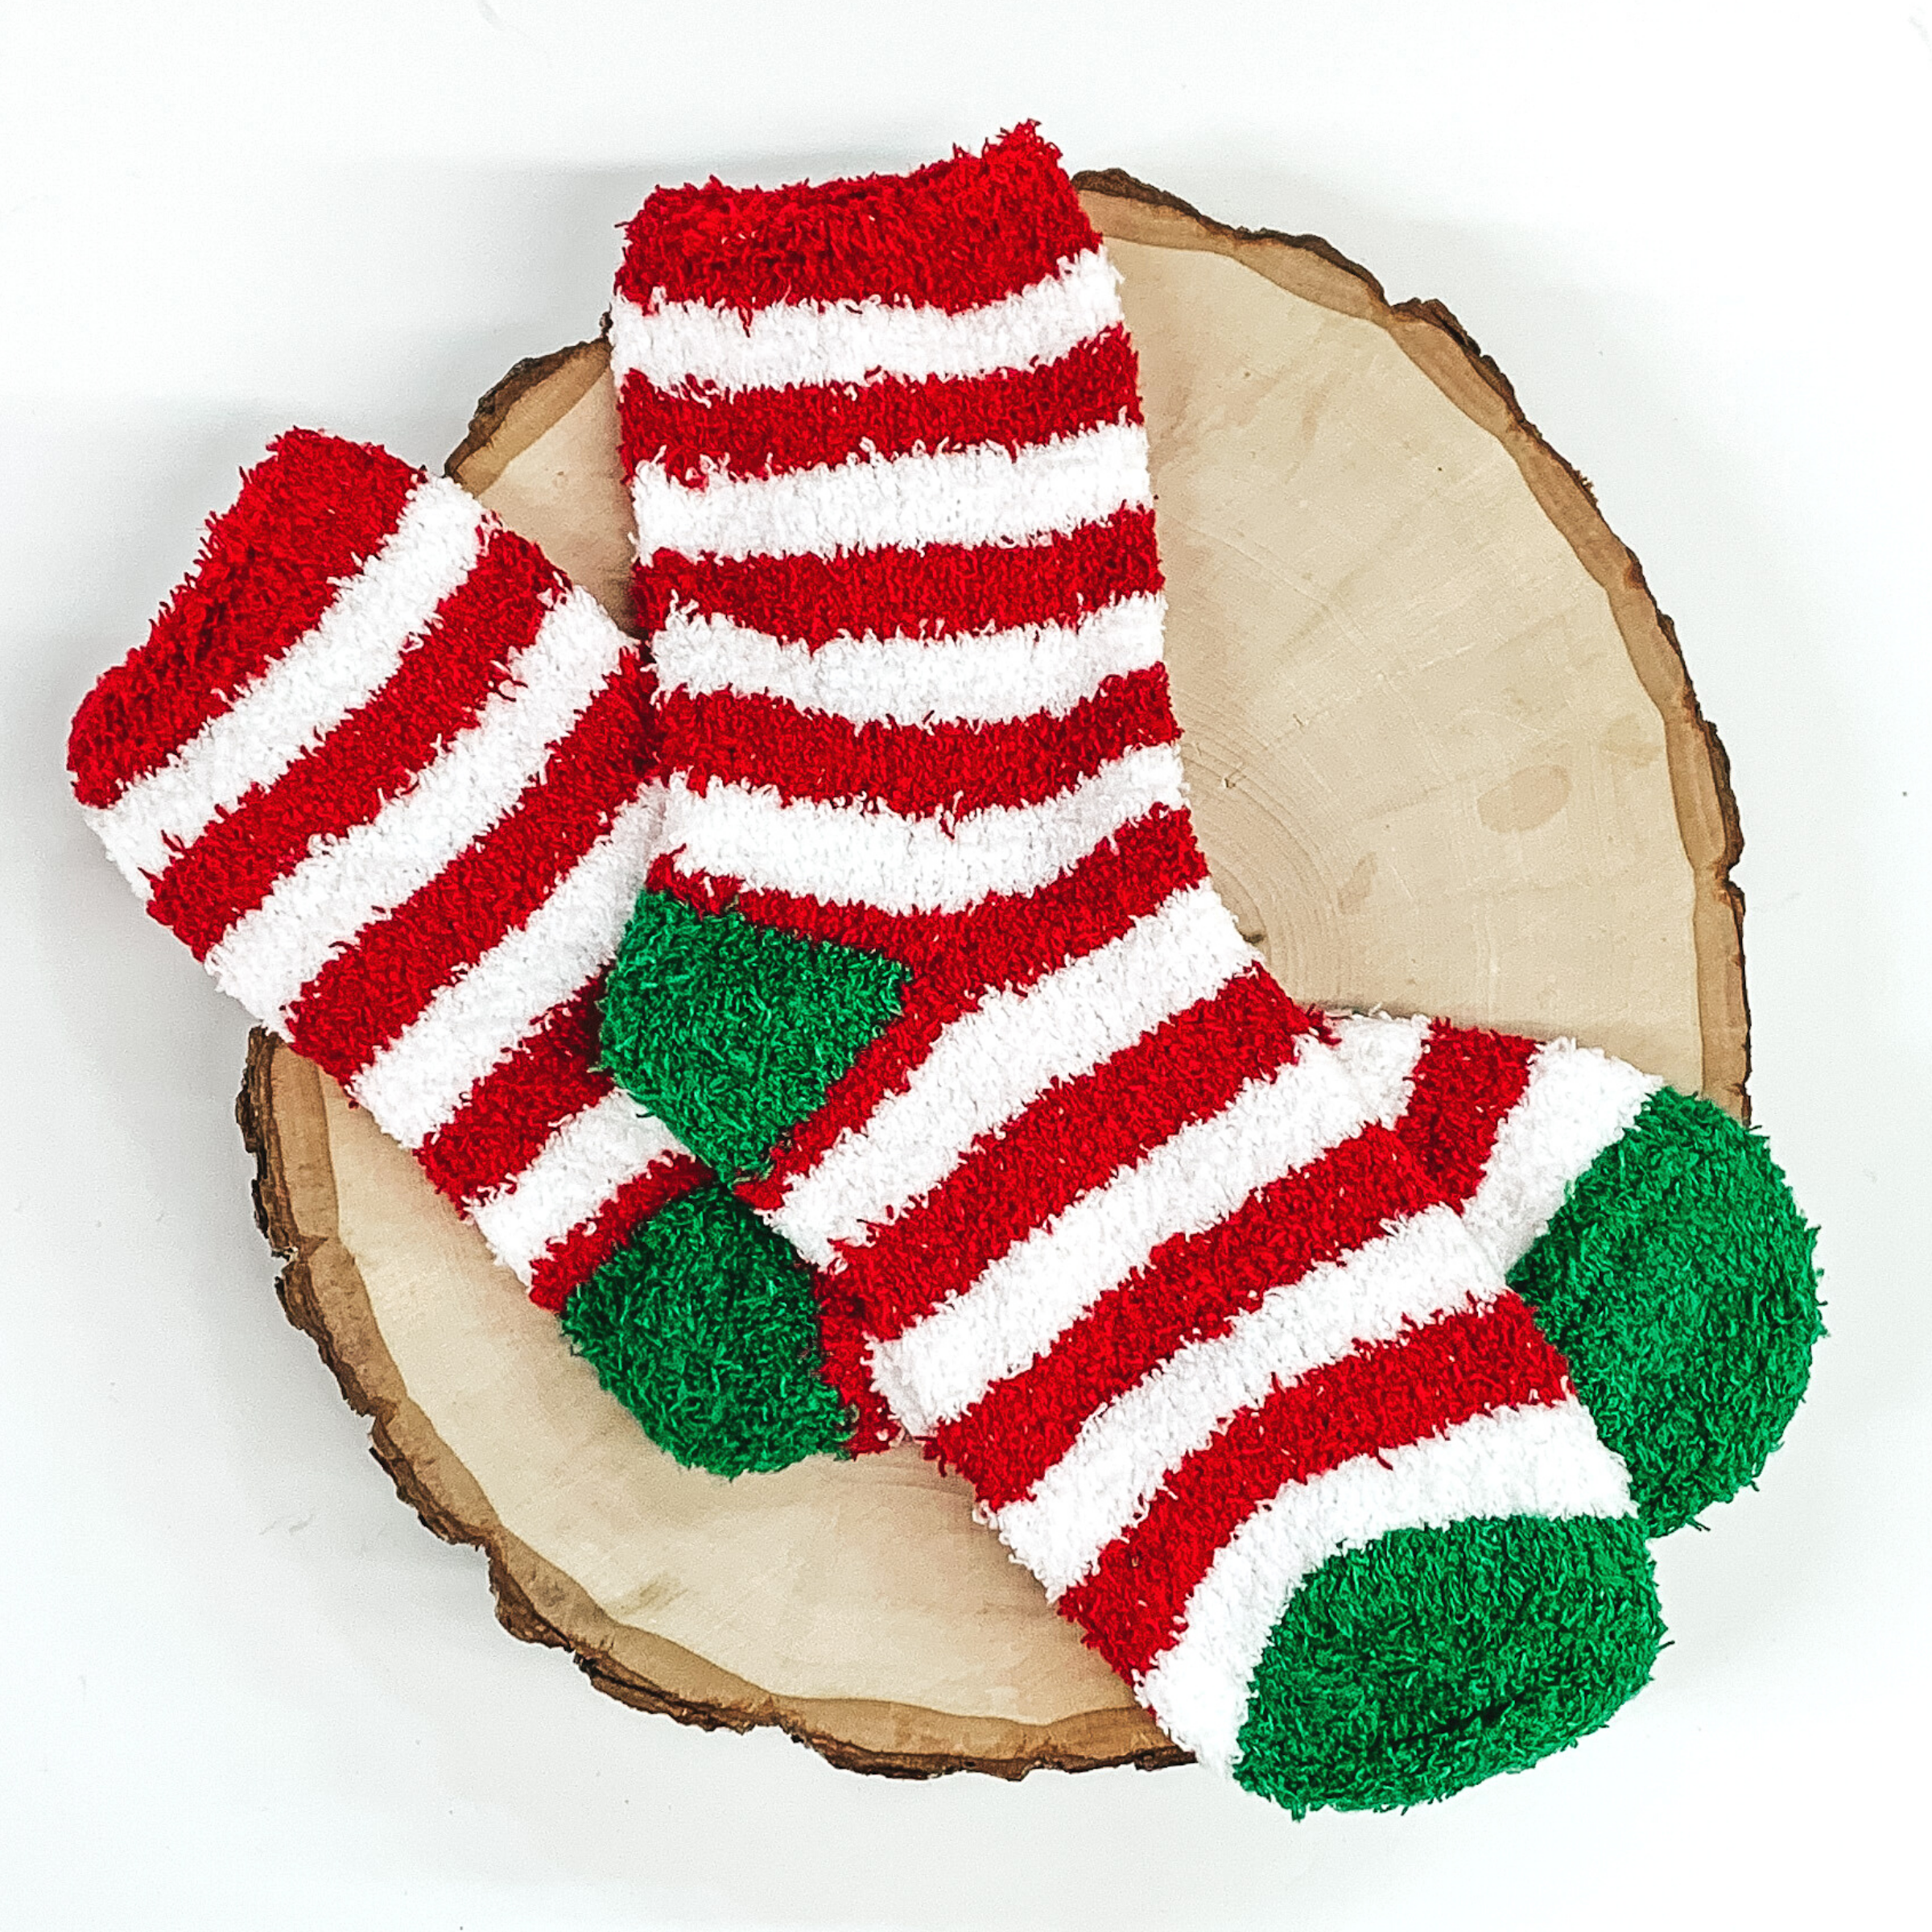 Fuzzy red and white striped socks with green toes and heels. These socks are pictured laying on a piece of wood that is on a white background.